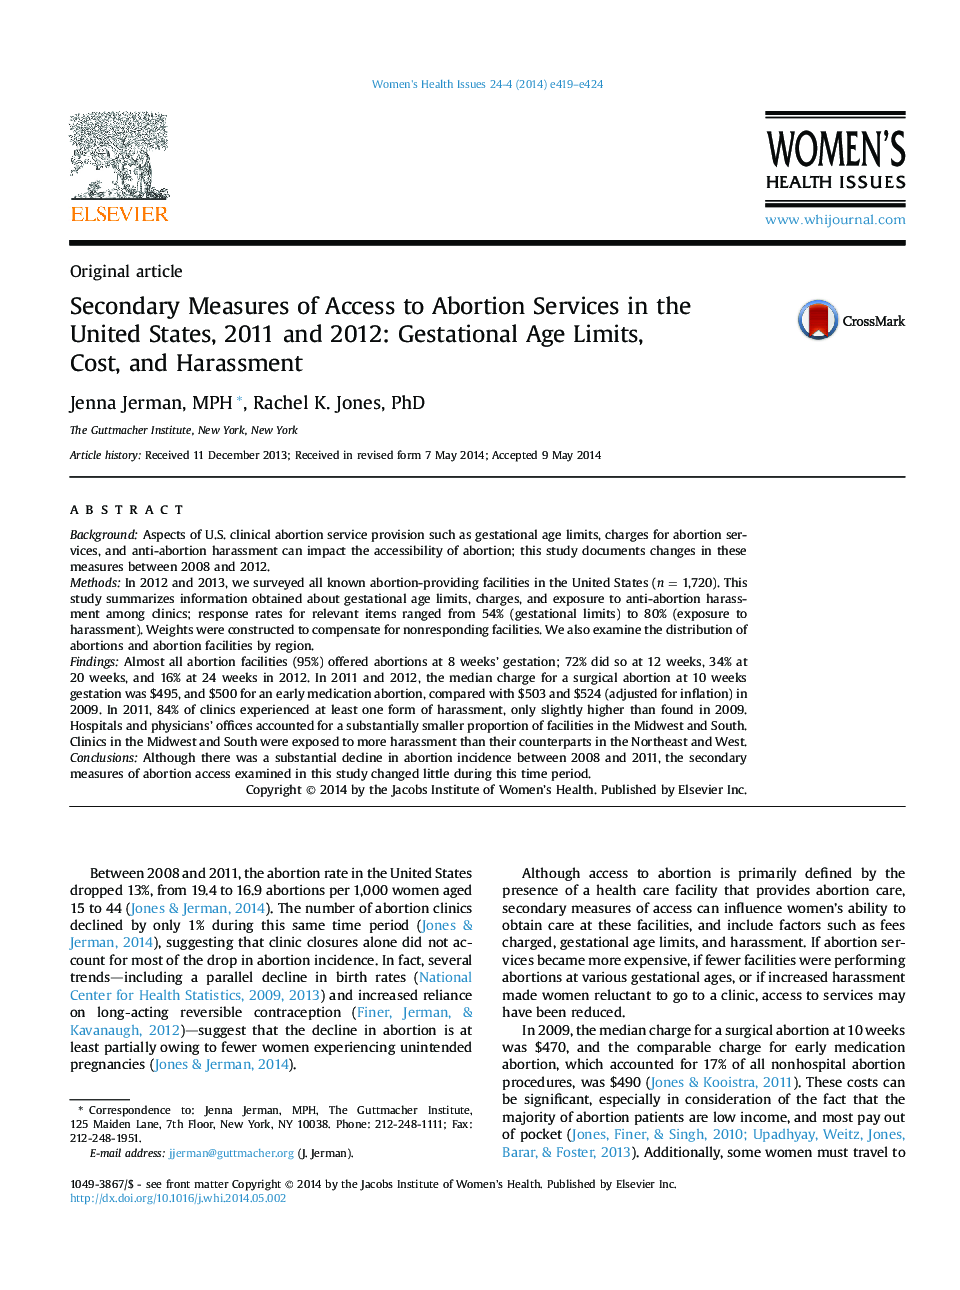 Secondary Measures of Access to Abortion Services in the United States, 2011 and 2012: Gestational Age Limits, Cost, and Harassment